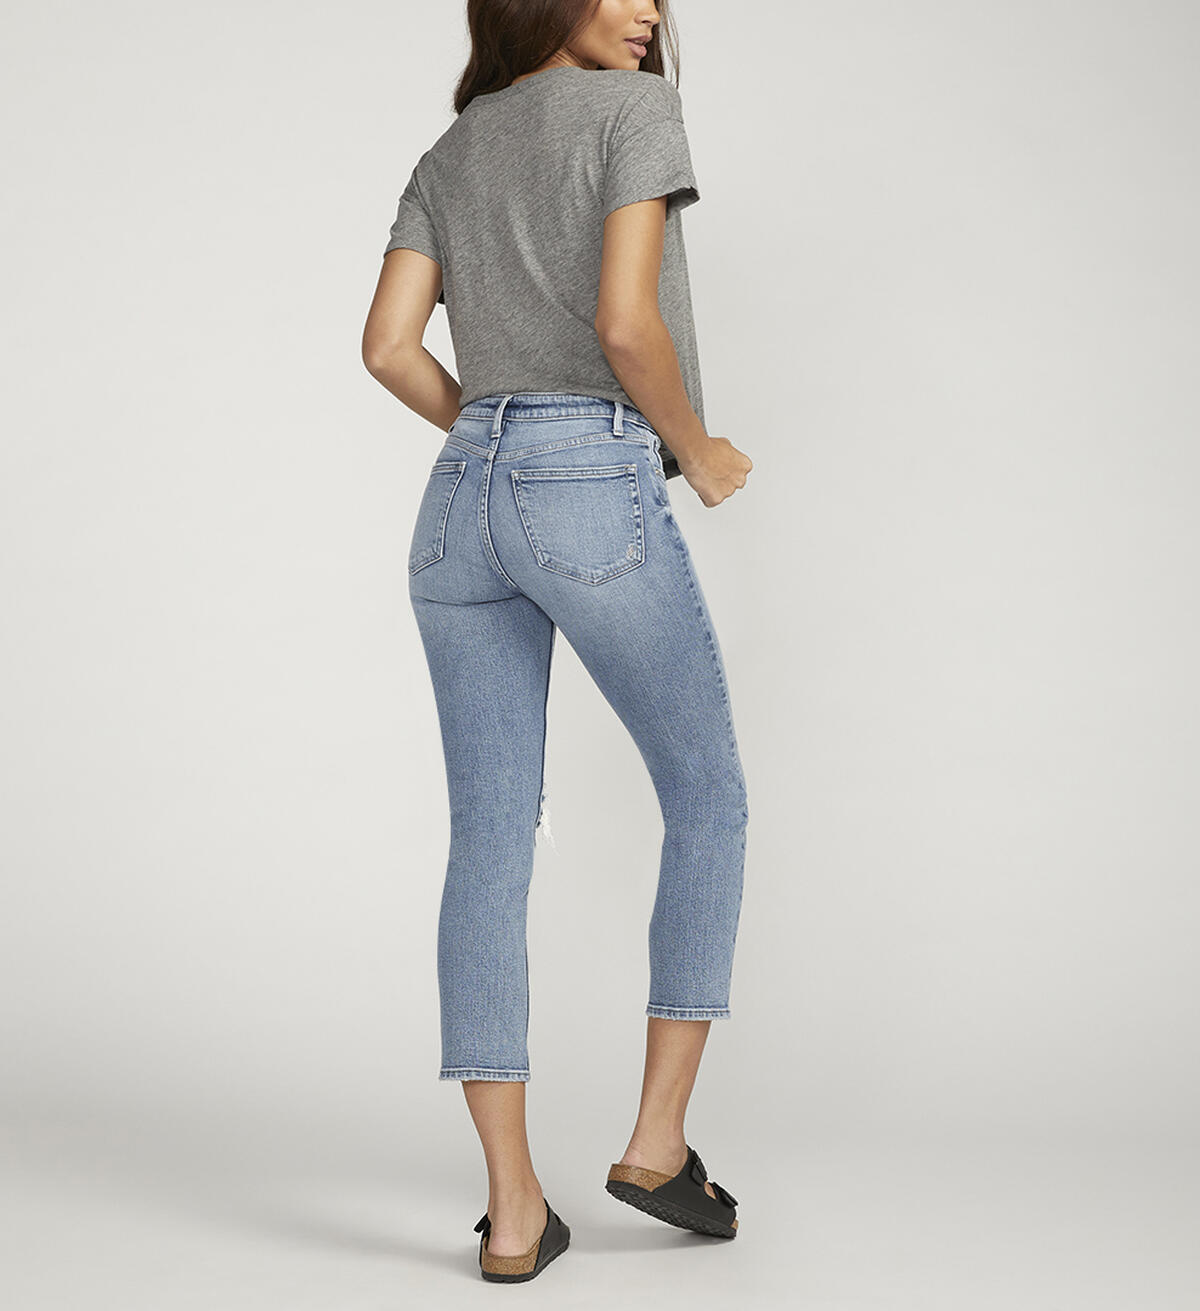 Most Wanted Mid Rise Straight Leg Ankle Jeans, , hi-res image number 1